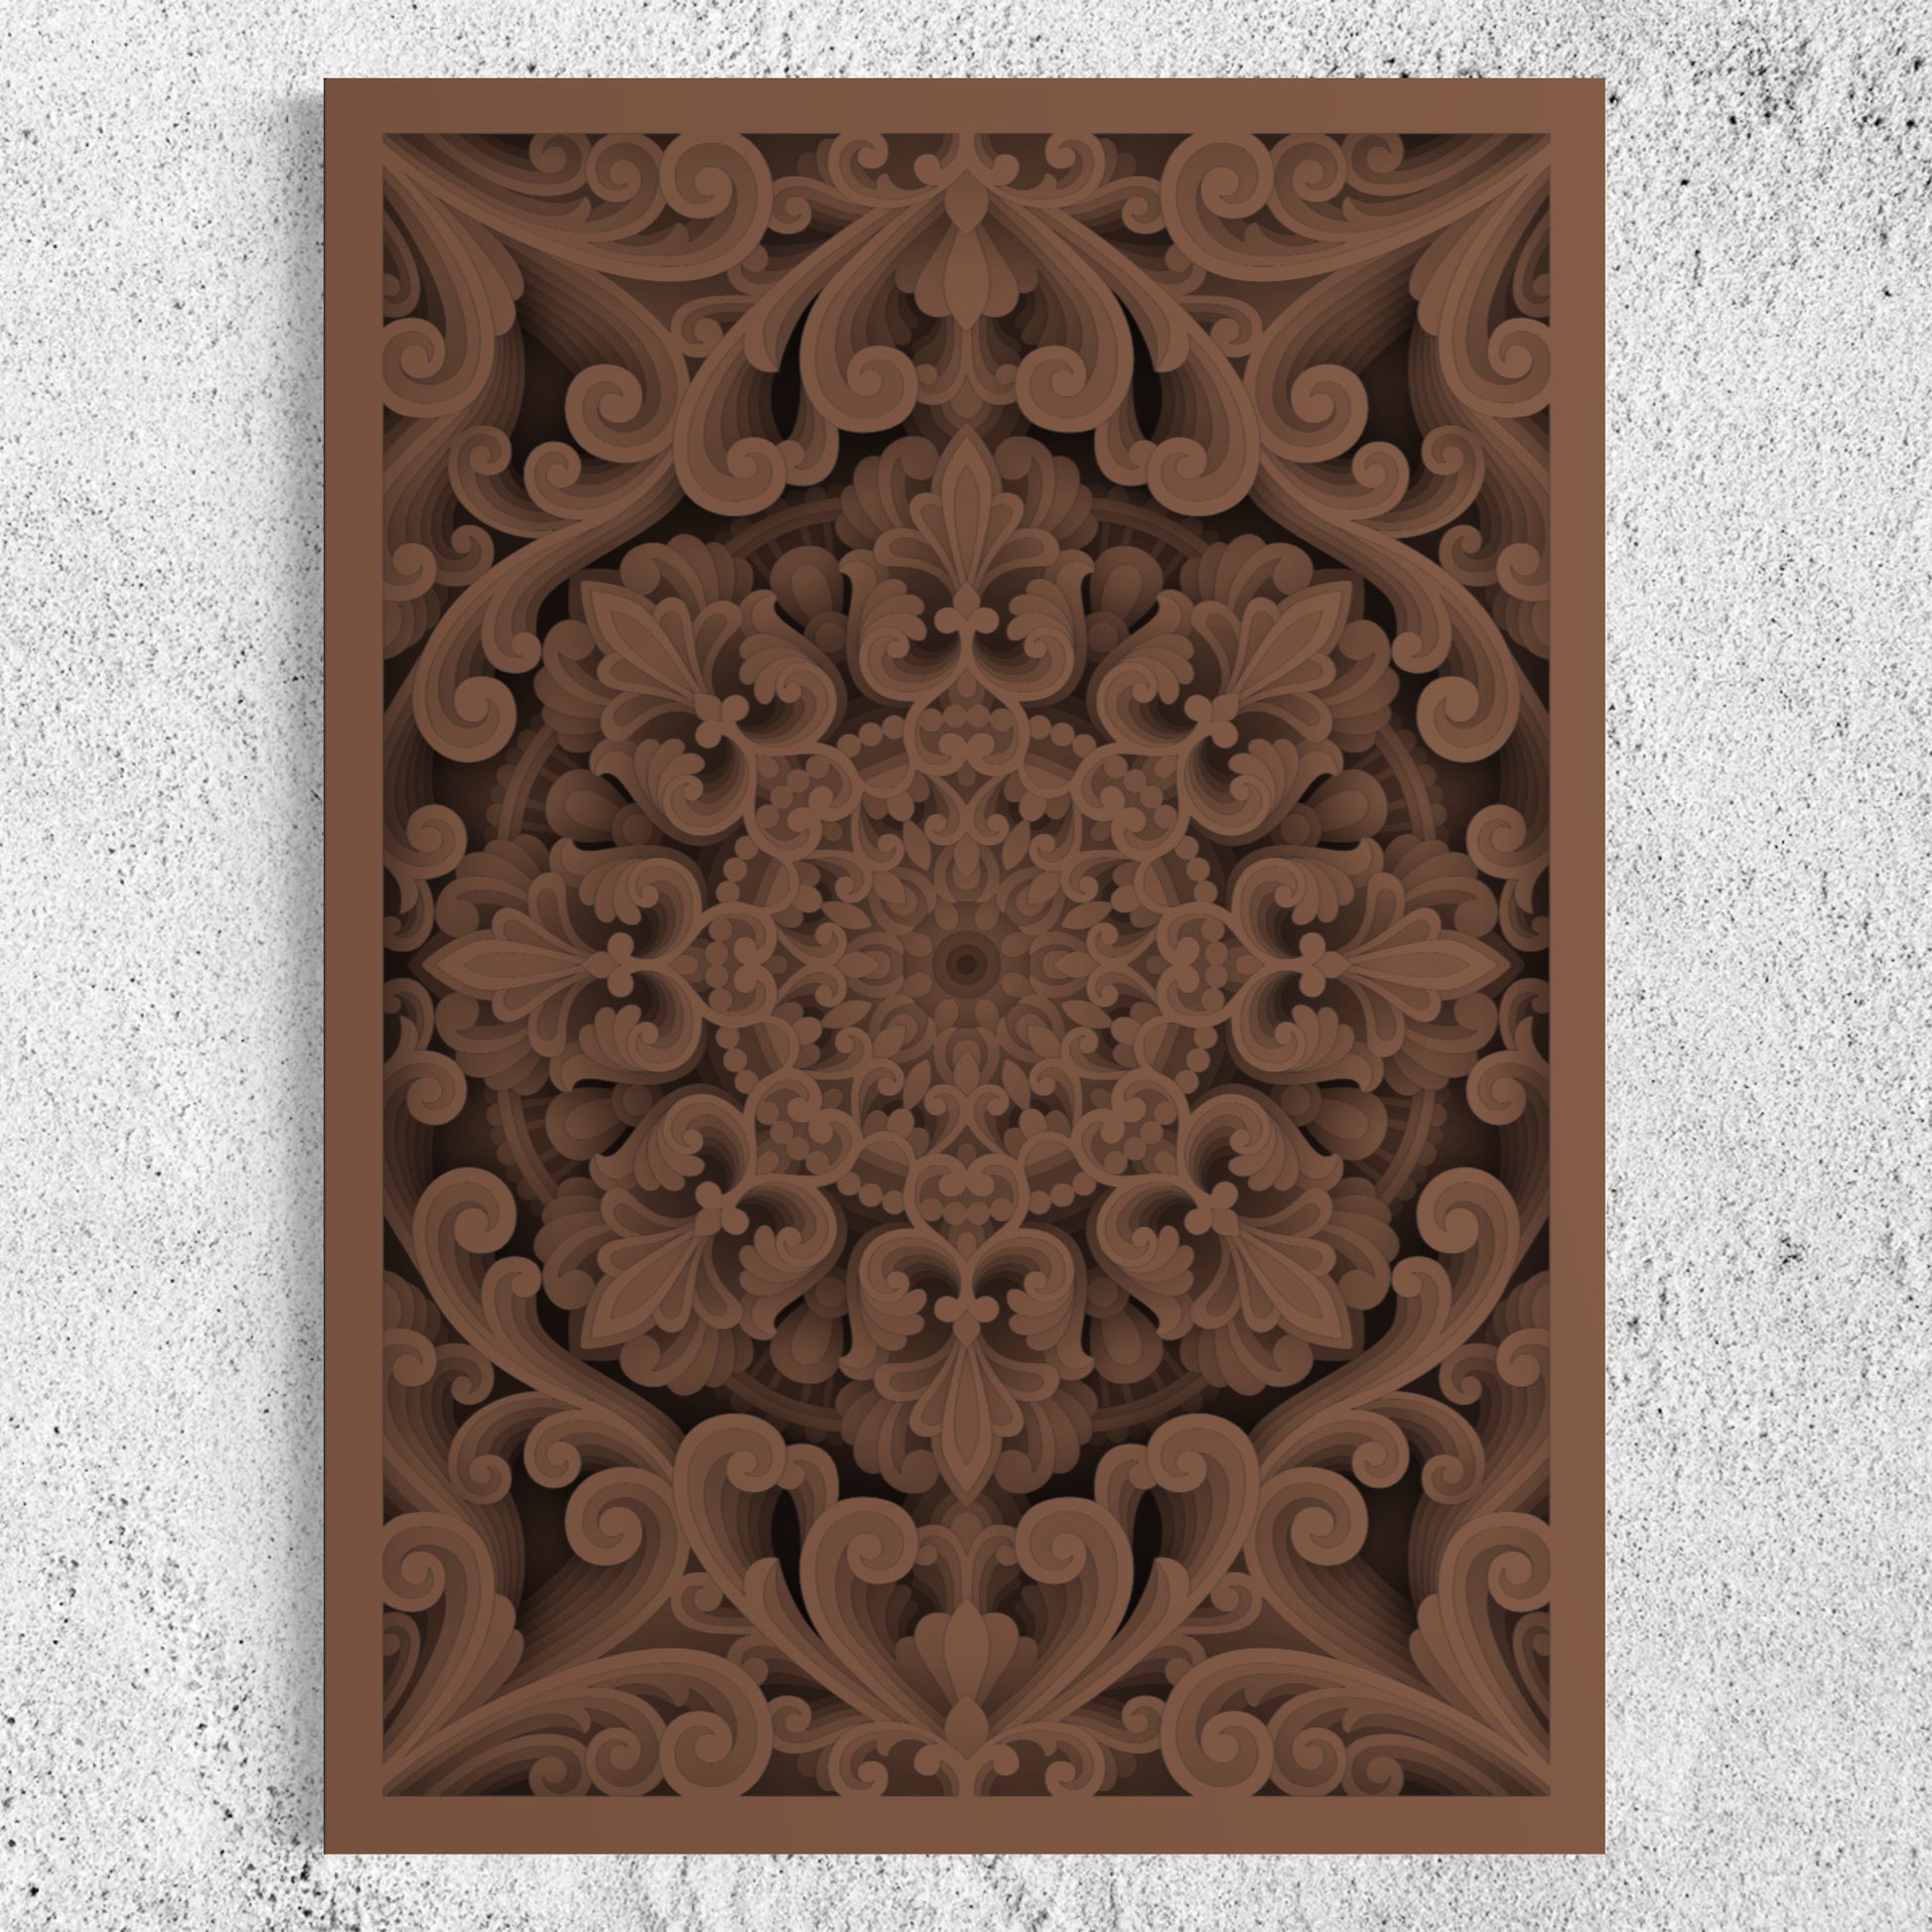 Nebula Wooden Wall Art | 22 x 30 Inch | Color Brown Bear